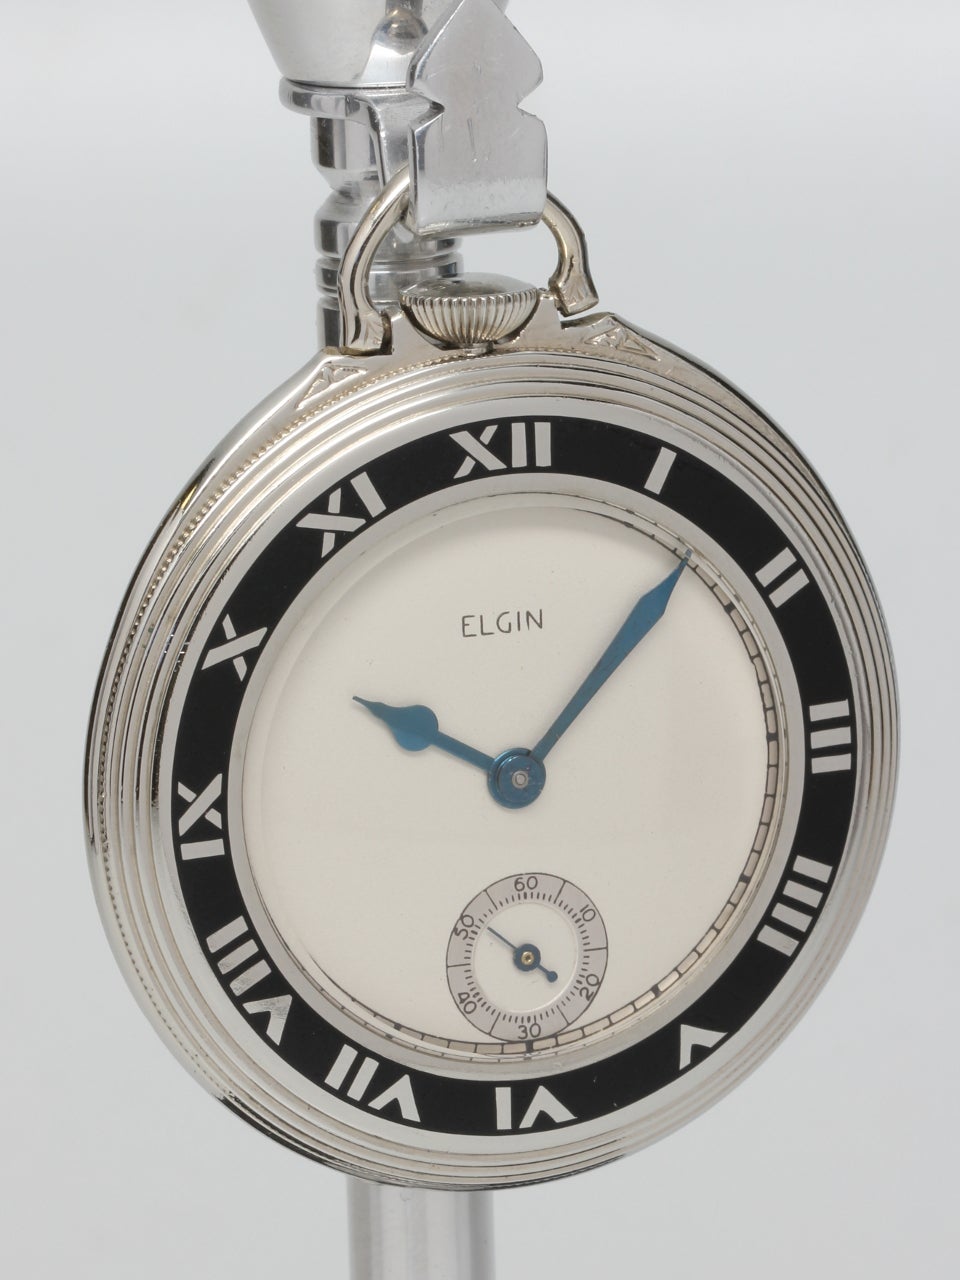 Elgin White Gold-Filled Art Deco Pocket Watch circa 1929. 12 size open face white gold-filled case with enamel chapter ring bezel. Matte white dial with heavy blued steel spade hands. 17-jewel manual-wind movement with subsidiary seconds. Clean case